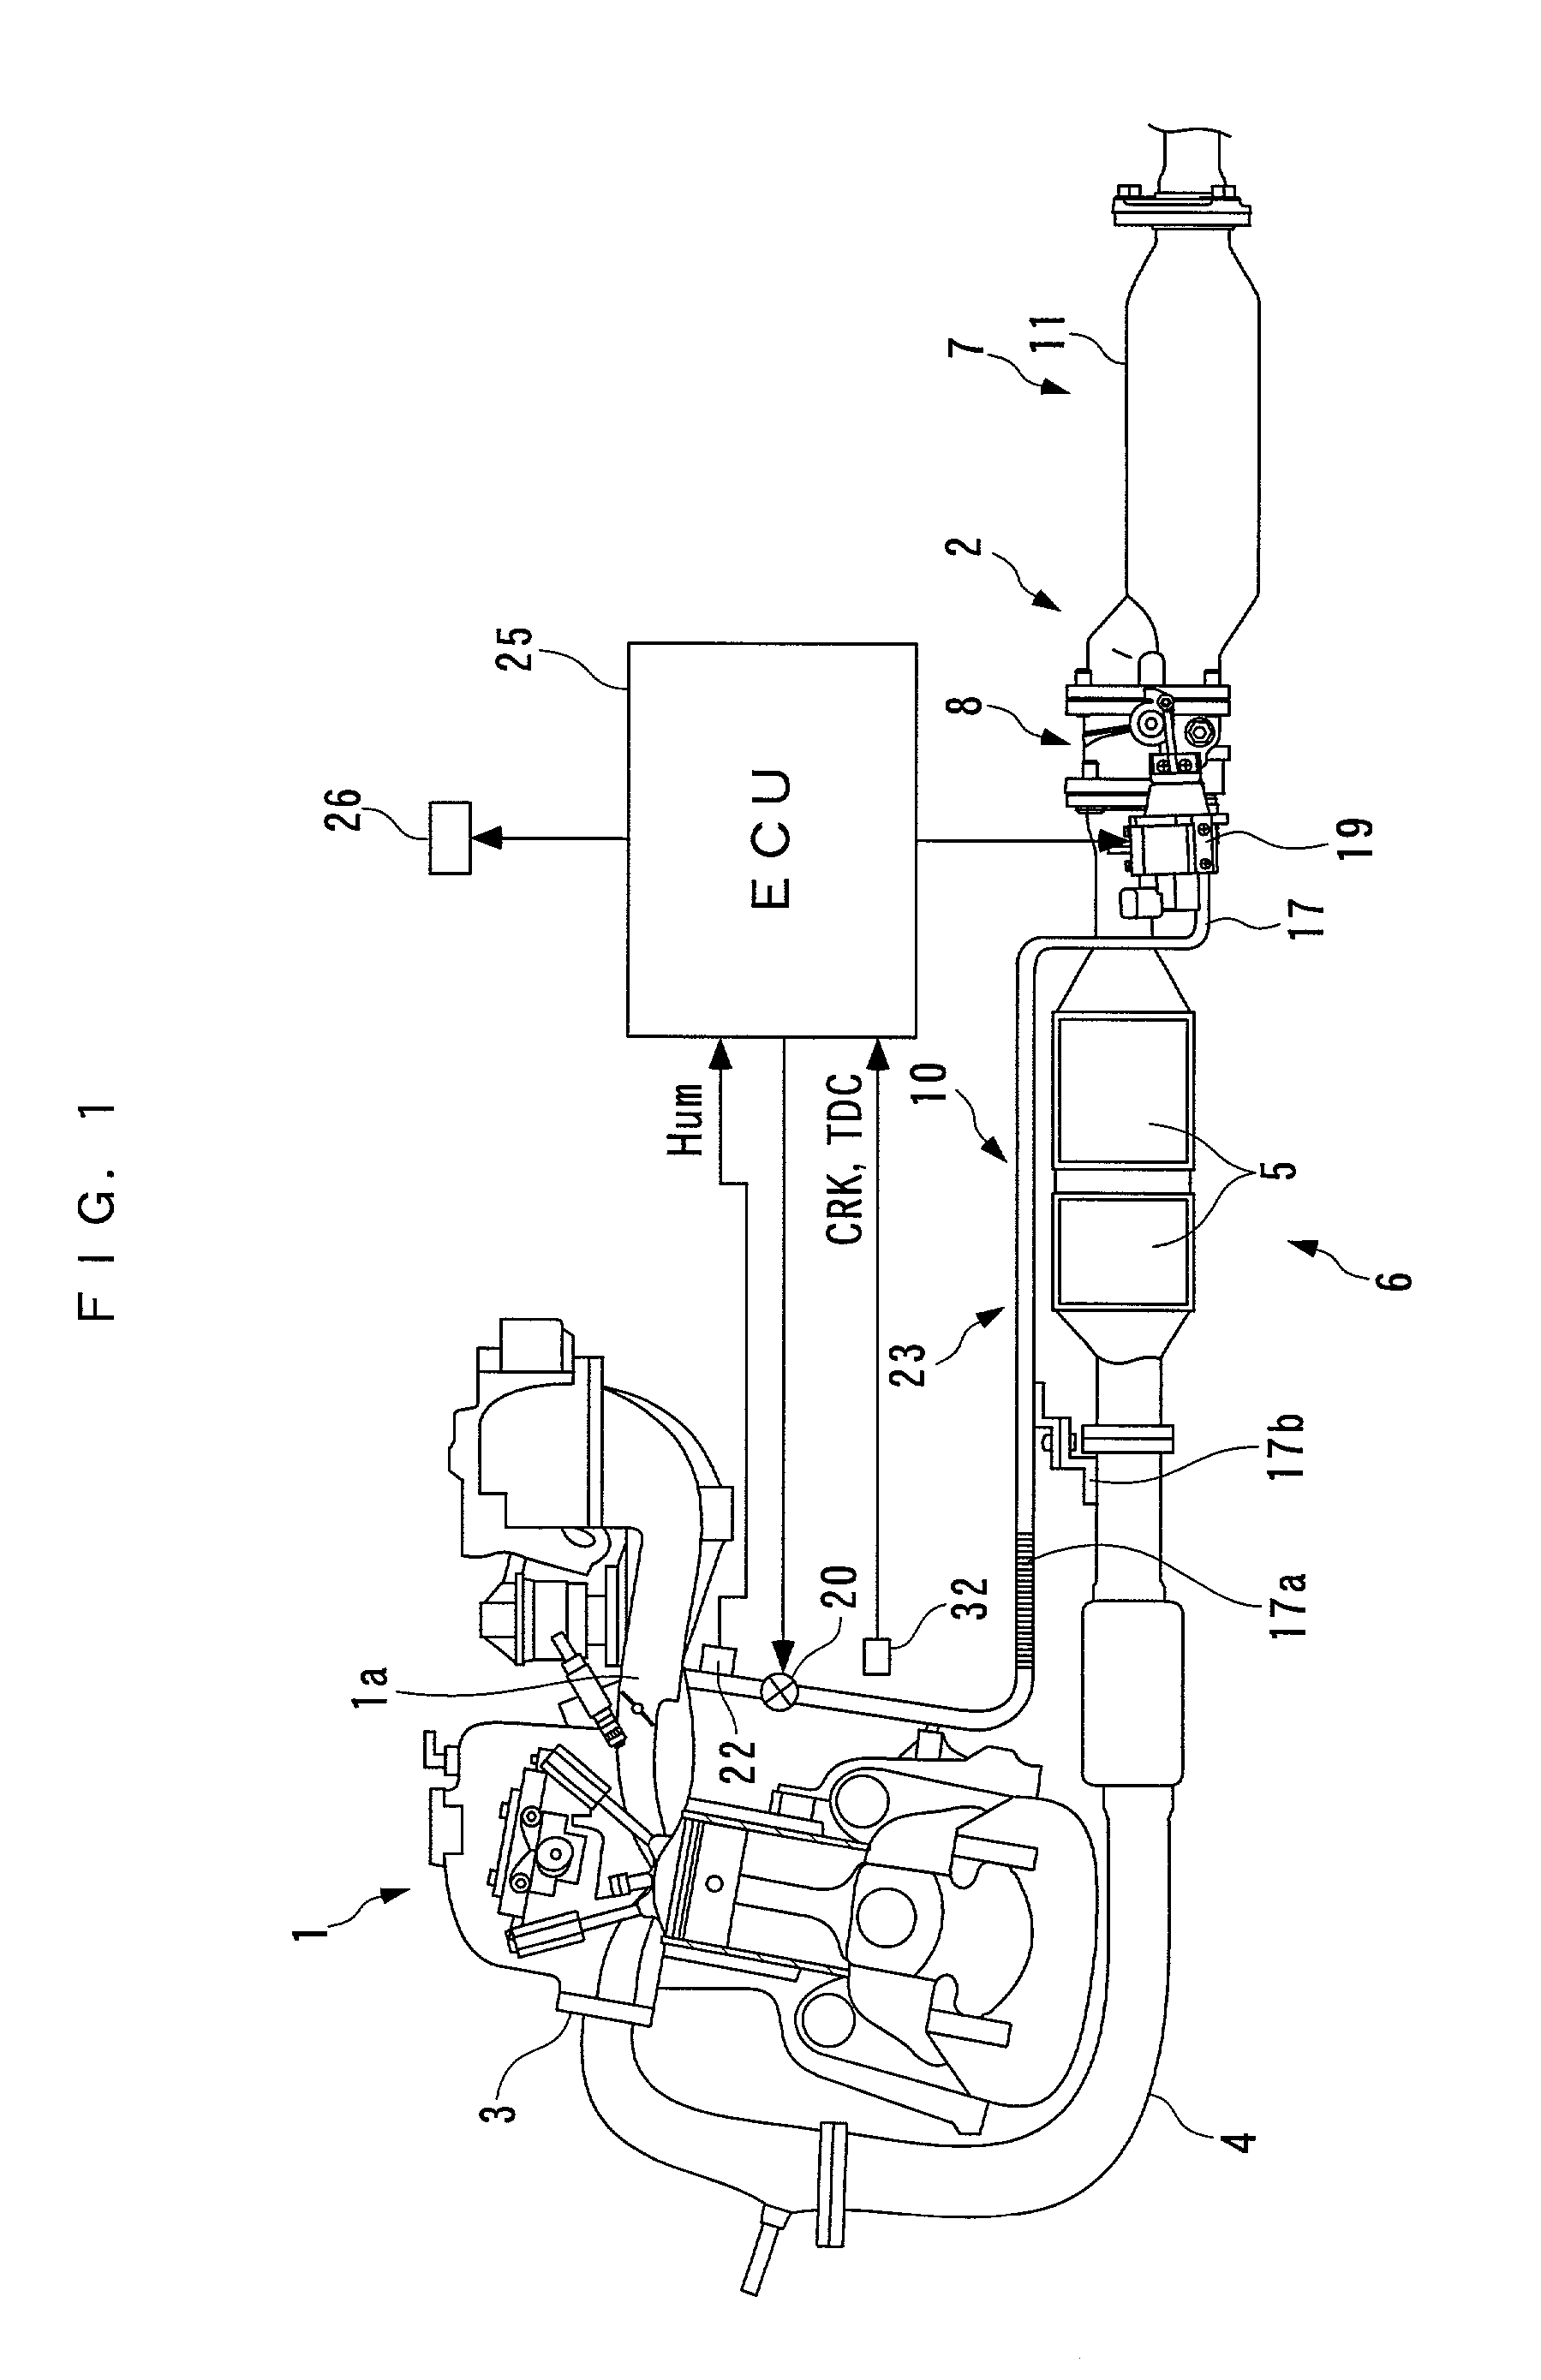 State determining apparatus for exhaust gas recirculation system